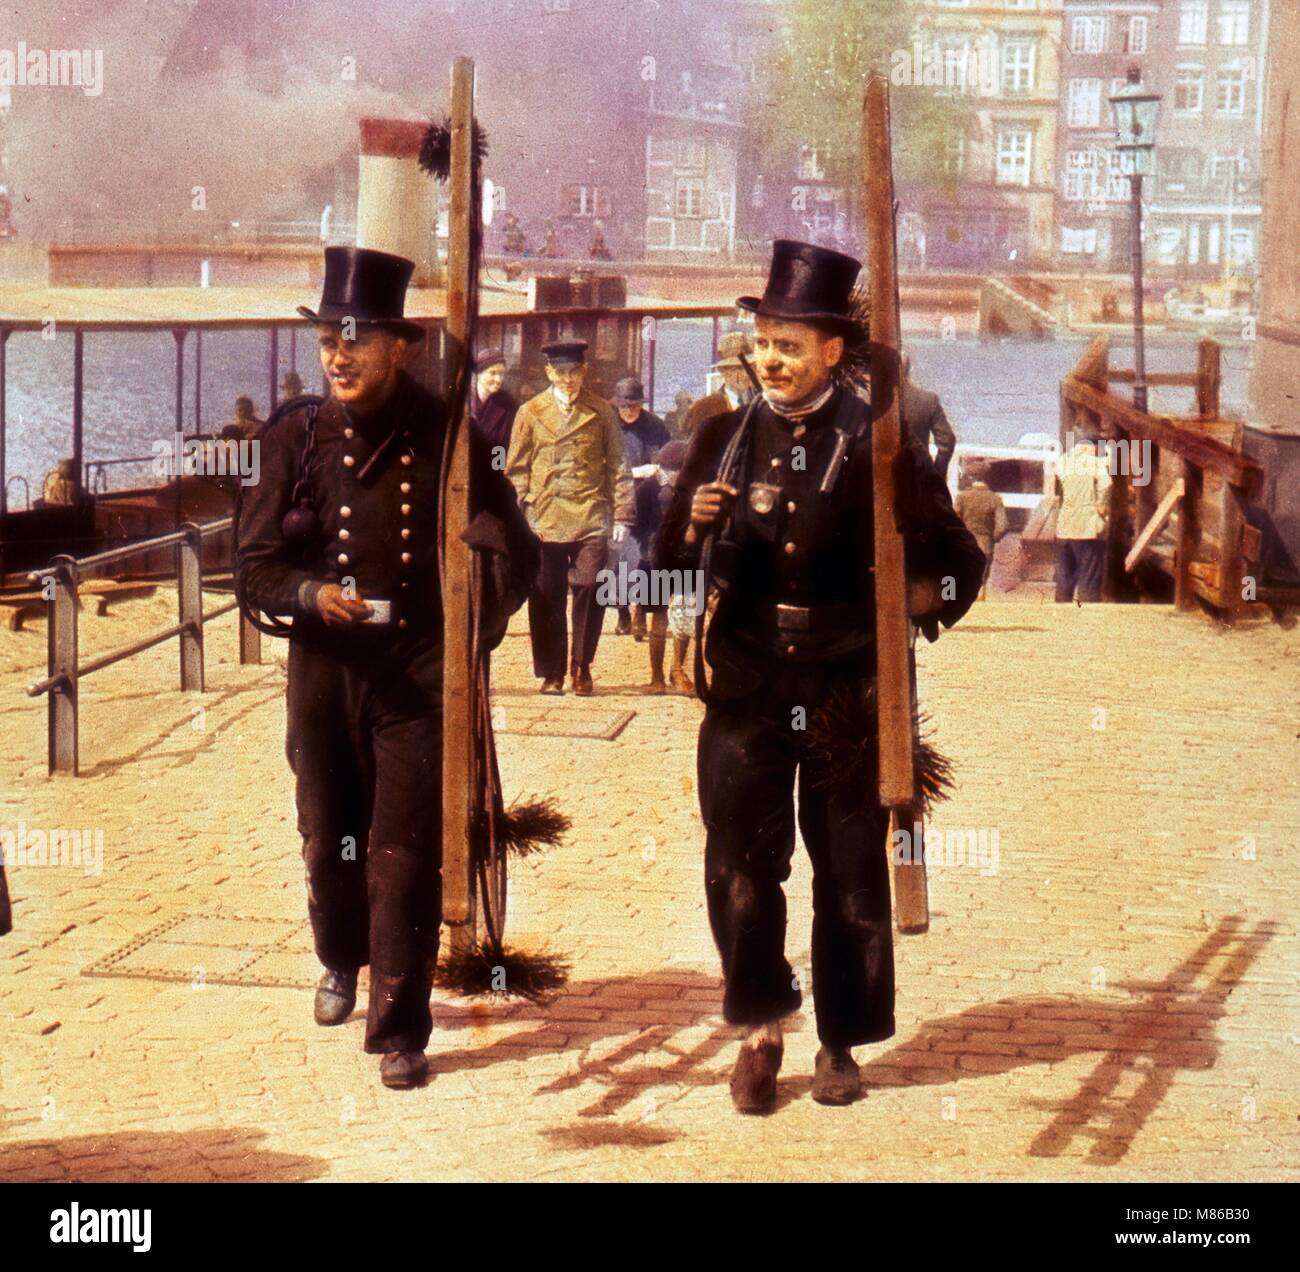 Colorized portrait of two male chimney sweeps, carrying ladders and tools, walking on a cobblestone street on the waterfront, Germany, circa 1910. (Photo by Burton Holmes) Stock Photo